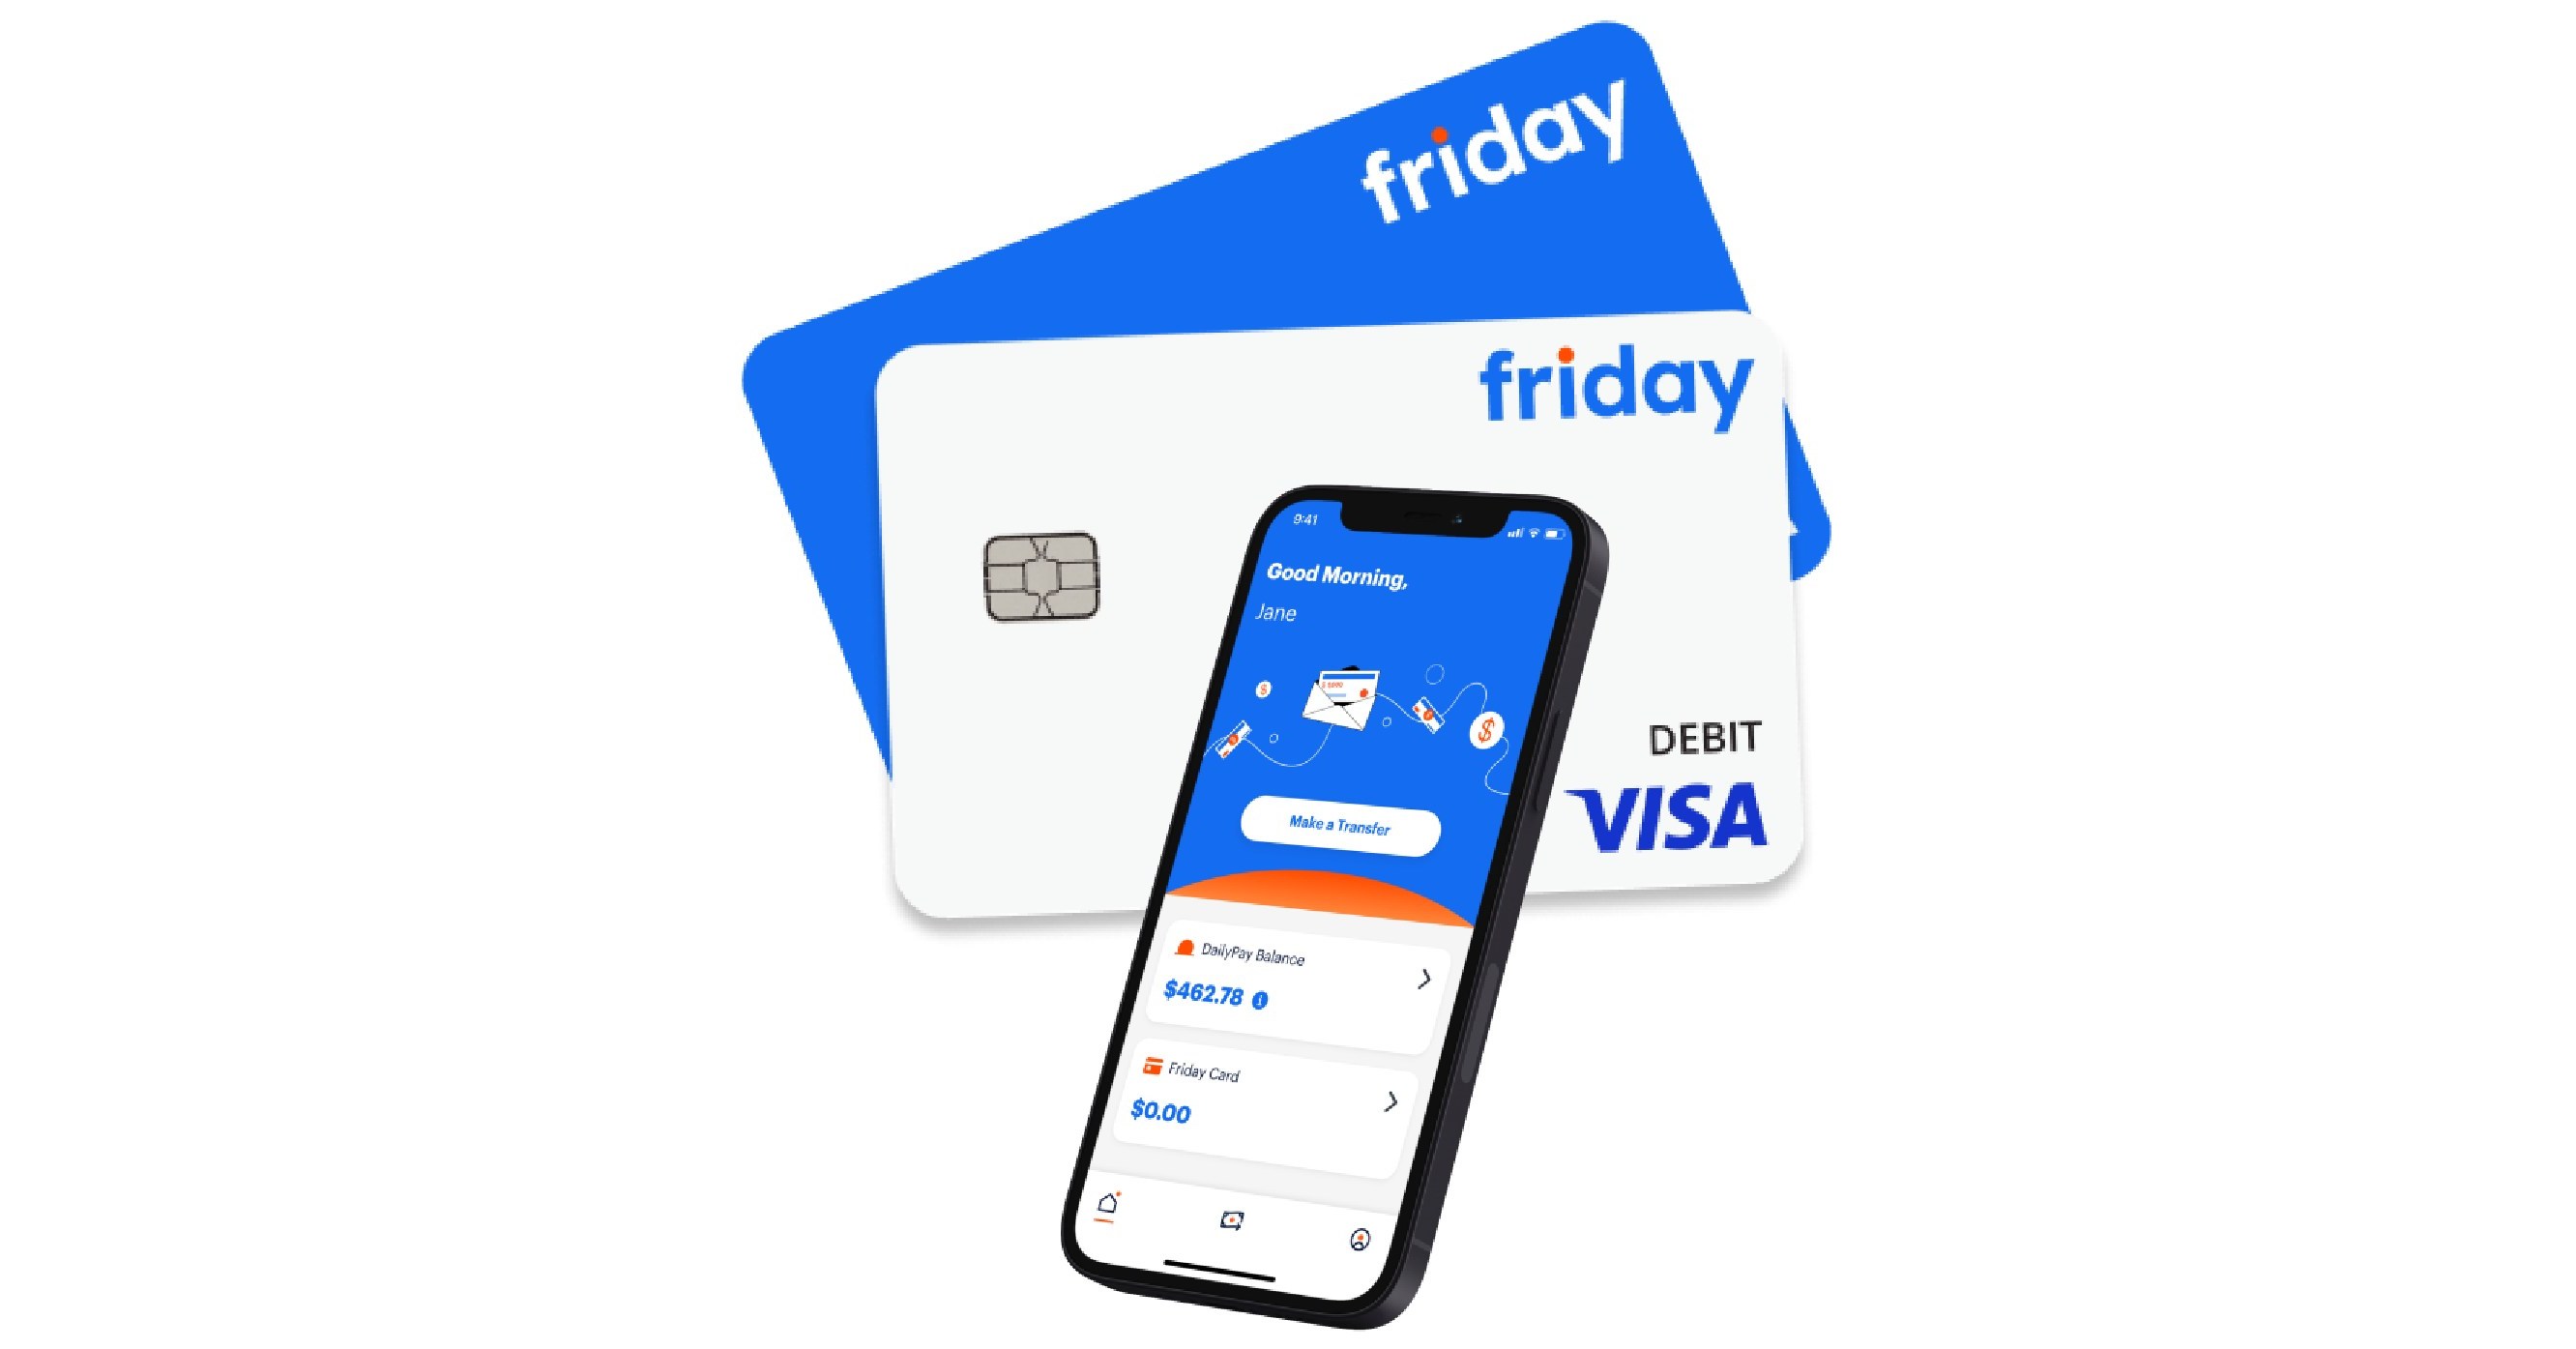 DailyPay Launches Friday™, the GPR Card and Mobile App, Powering No-Fee,  Instant On-Demand Pay Transfers